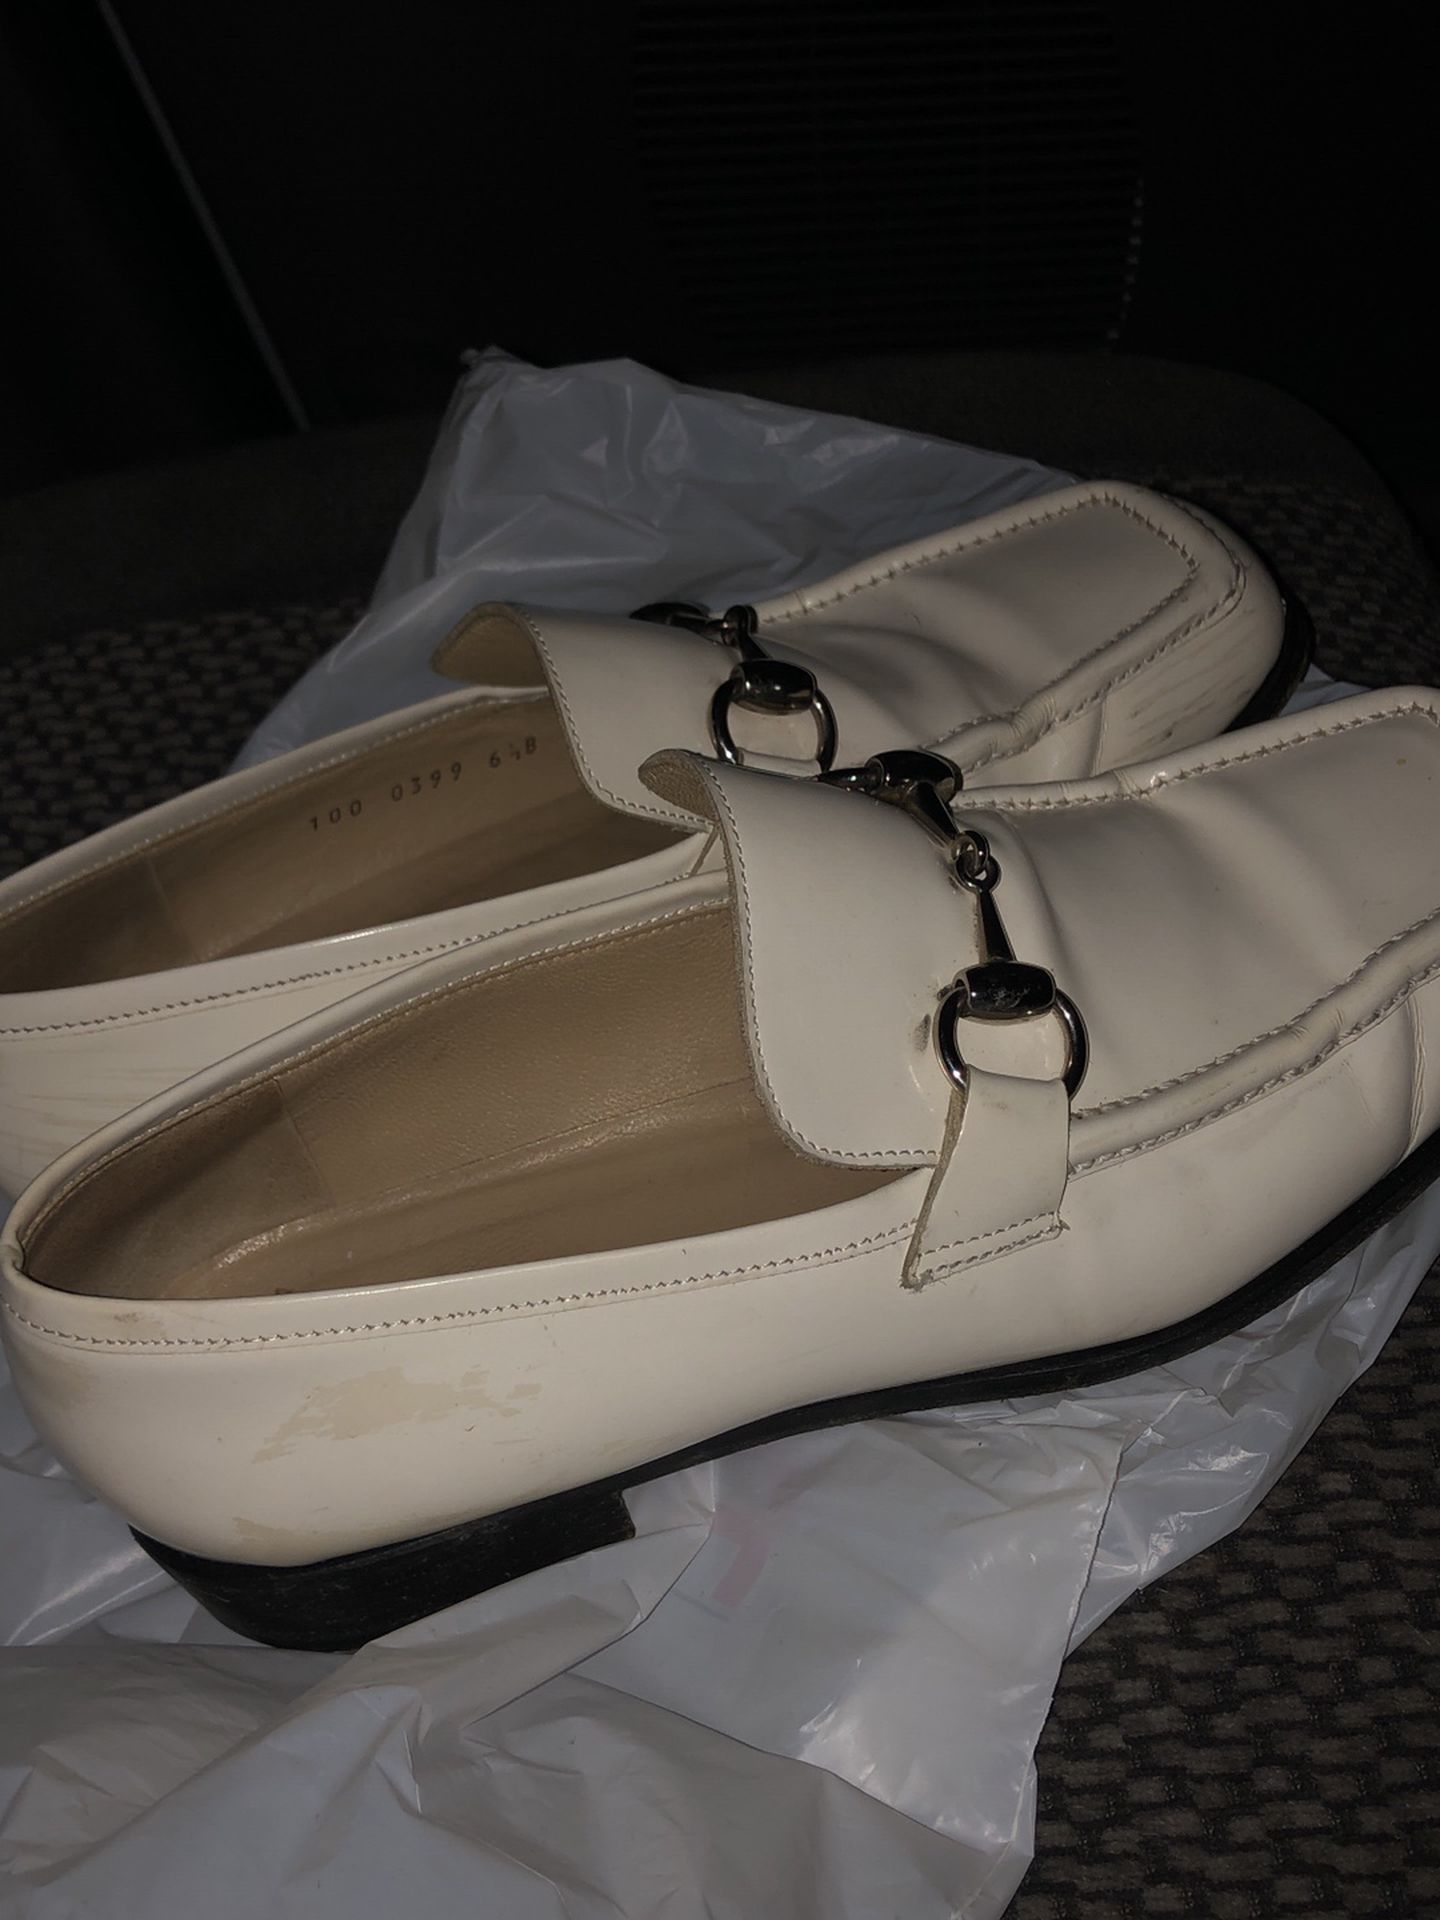 Gucci Loafers Size 6.5